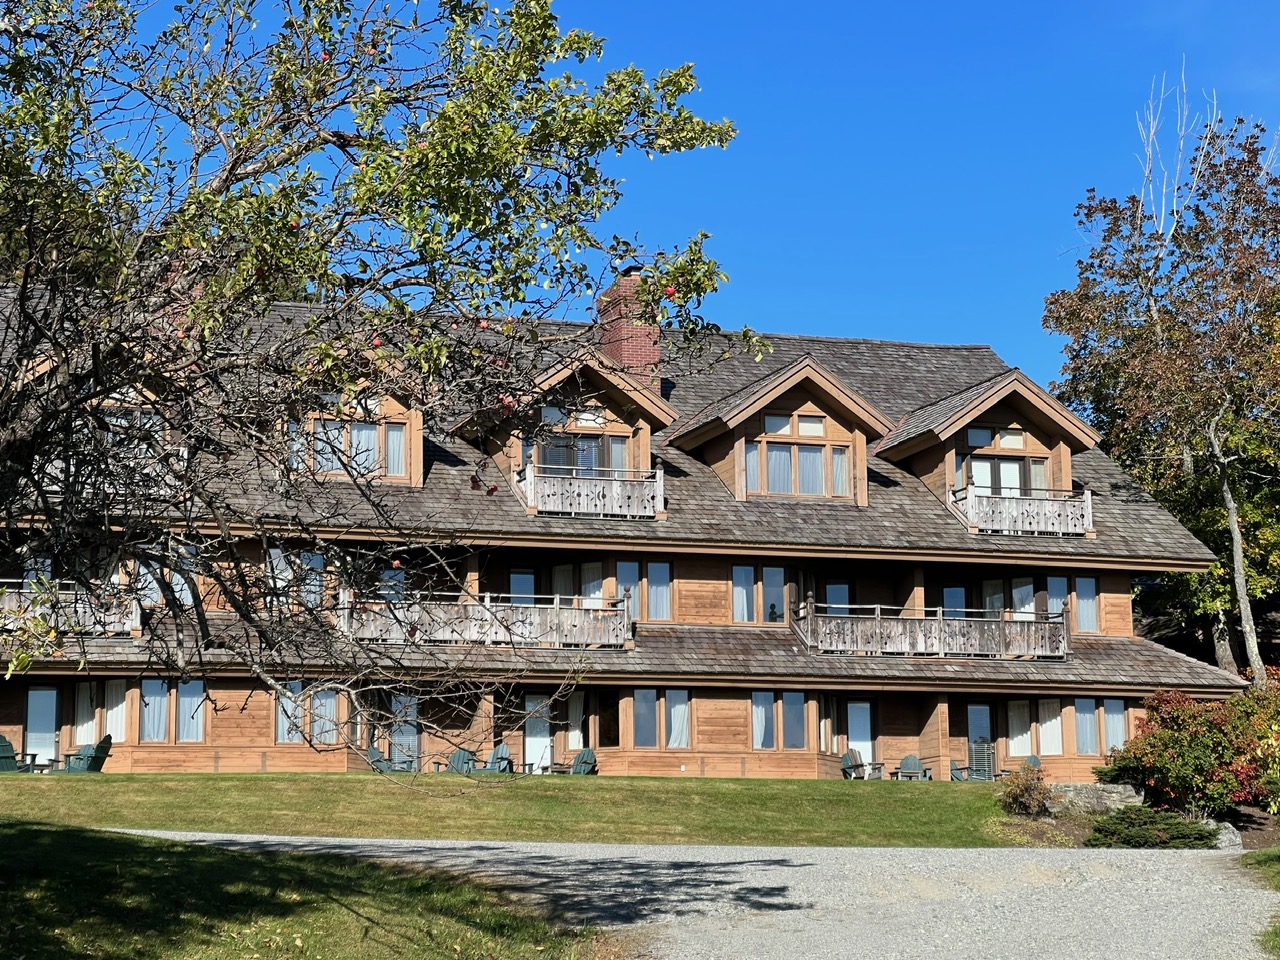 The Trapp Family Lodge is a great blend of history and comfort: the building looks like a traditional cabin, made of wood, with large shutters, and great porch views! 